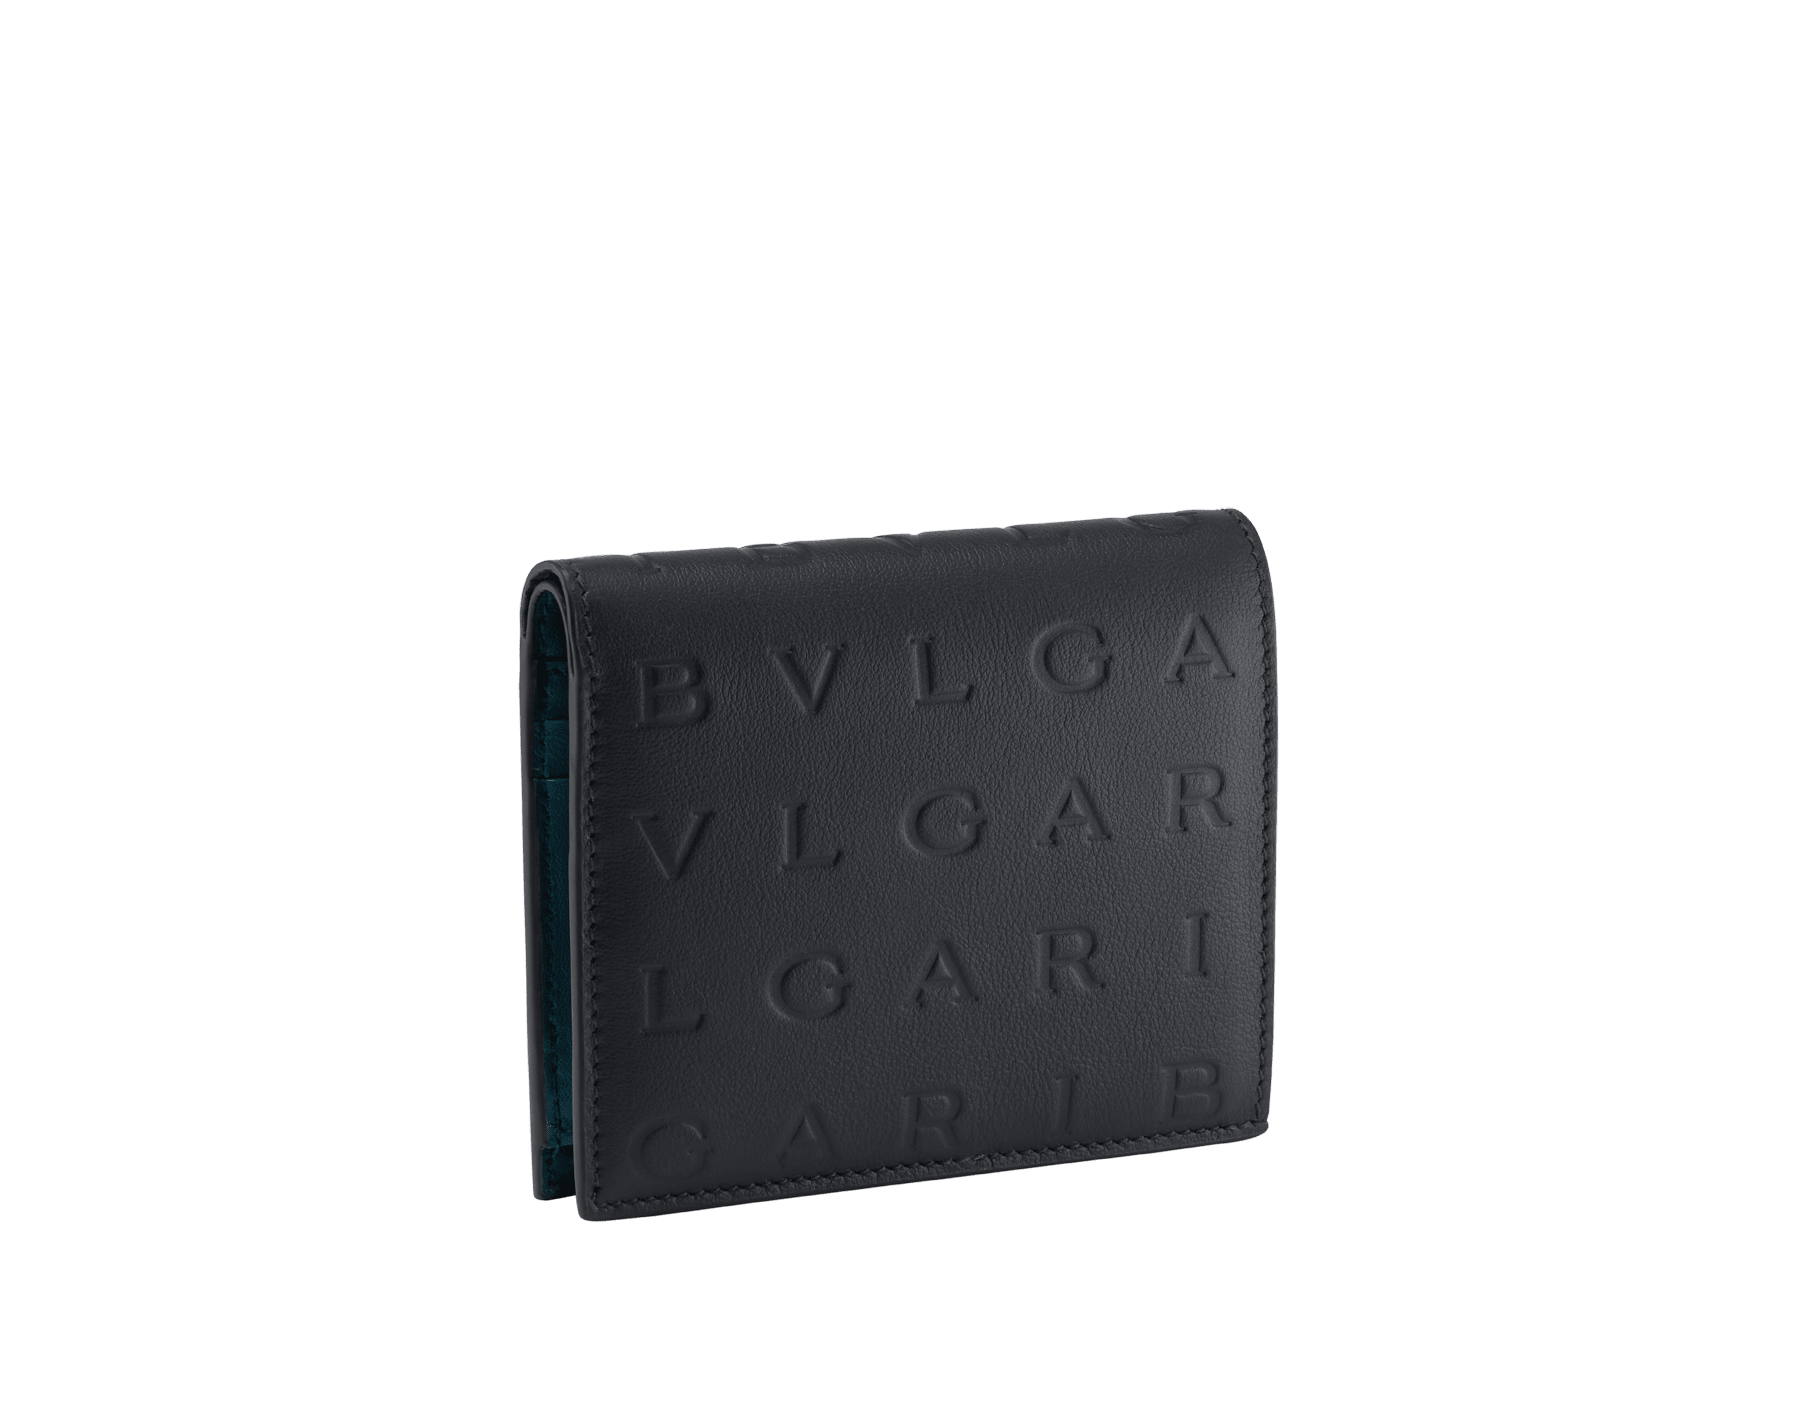 Bulgari Logo compact wallet in Ivory Opal white calf leather with hot stamped Infinitum Bulgari logo pattern and plain Pink Spinel nappa leather lining. Light gold-plated brass hardware BVL-COMPACTWLT image 1